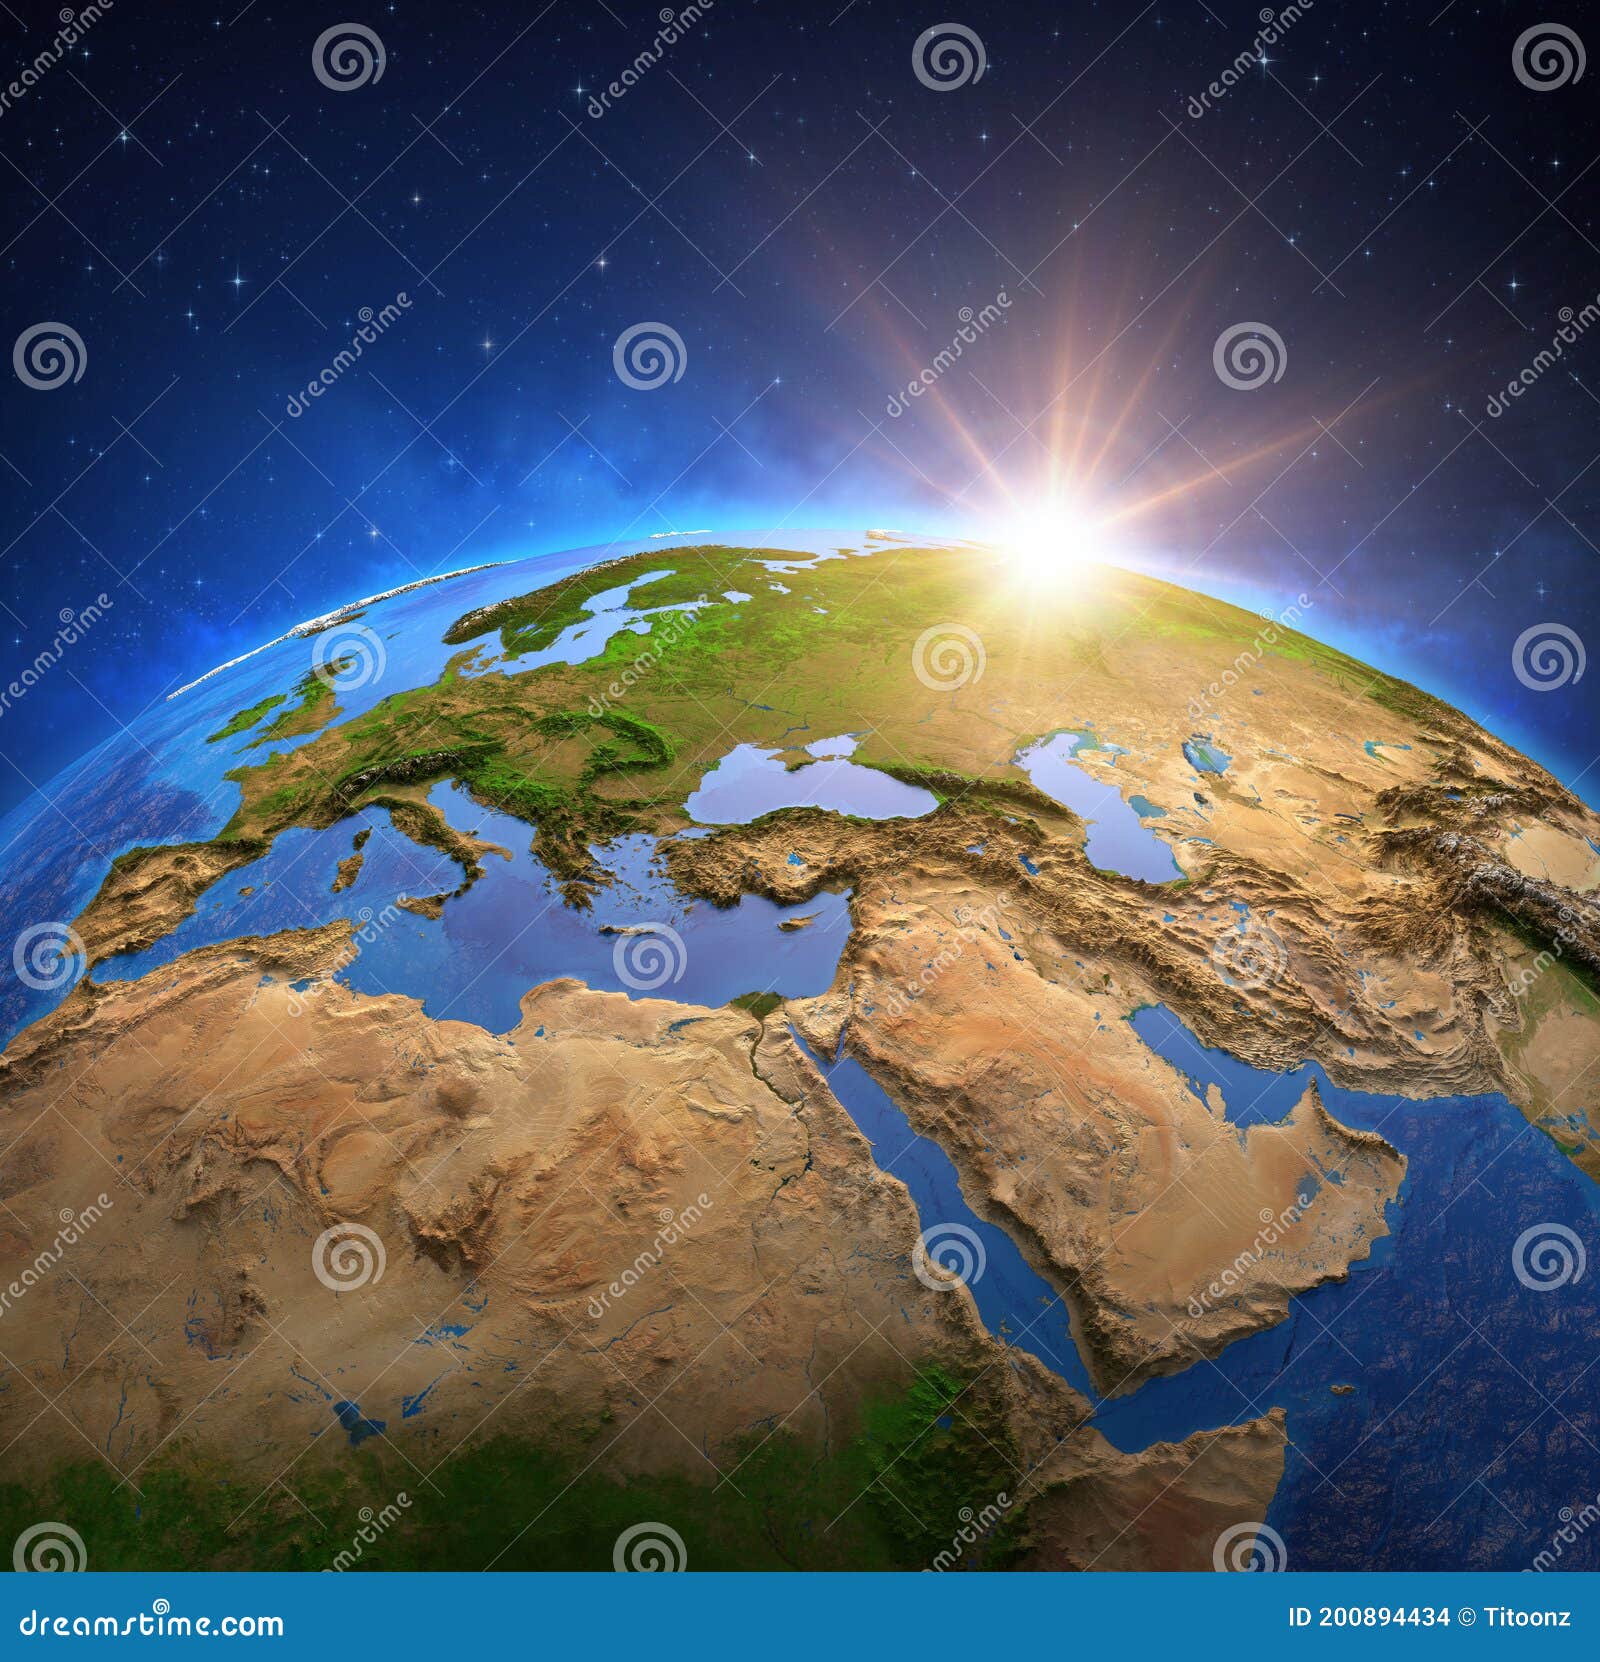 rising sun on europe and middle east, from space